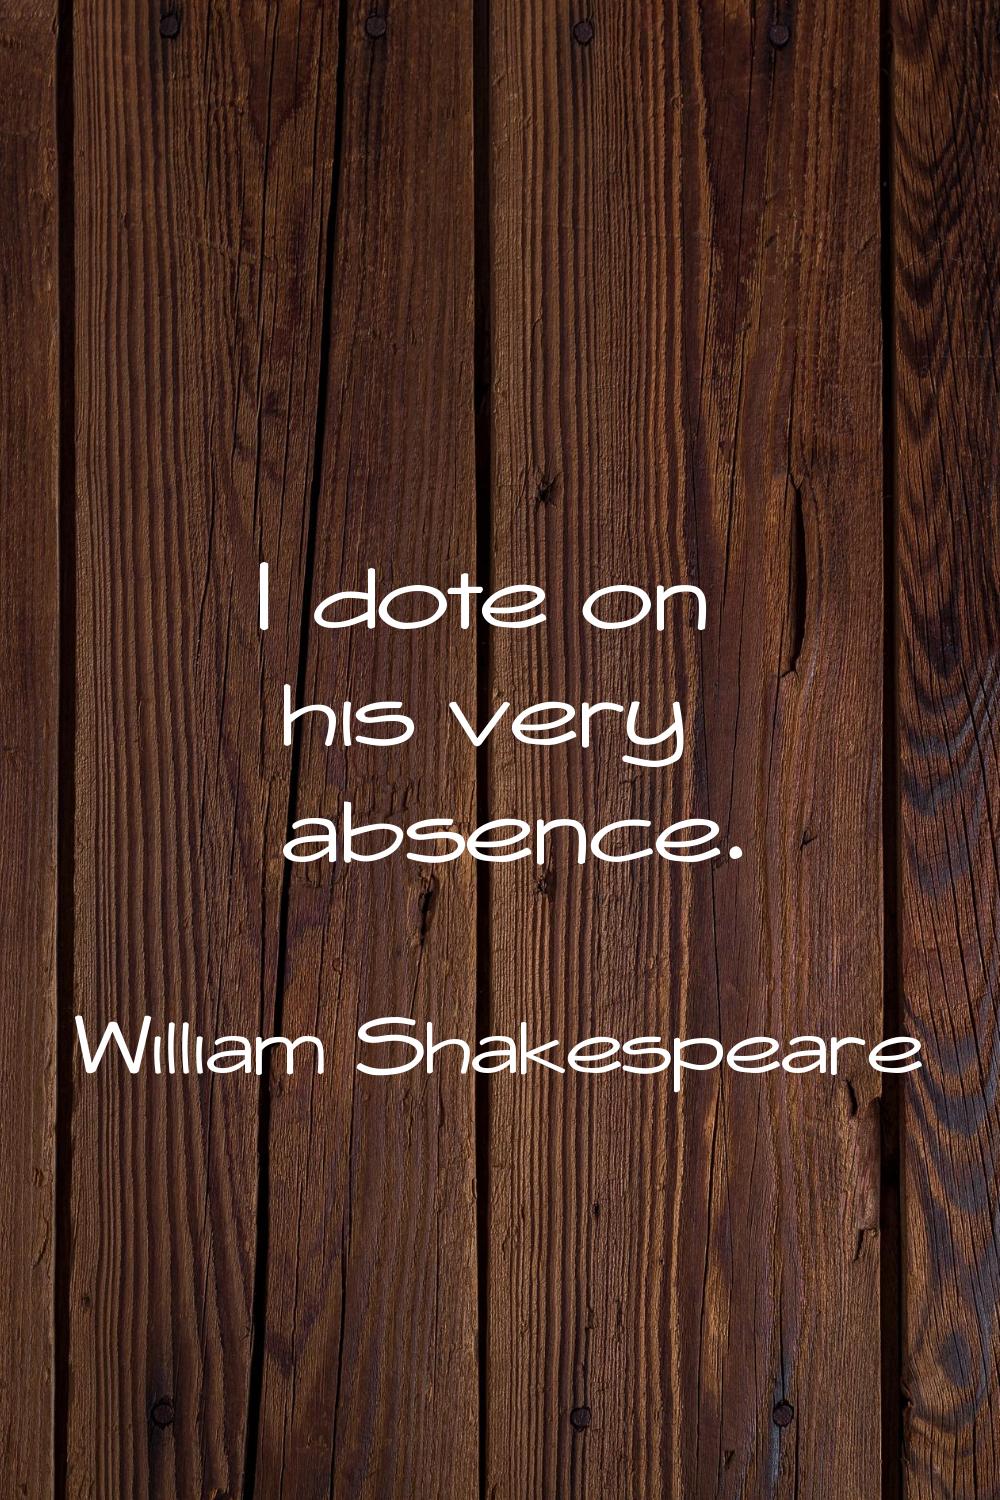 I dote on his very absence.